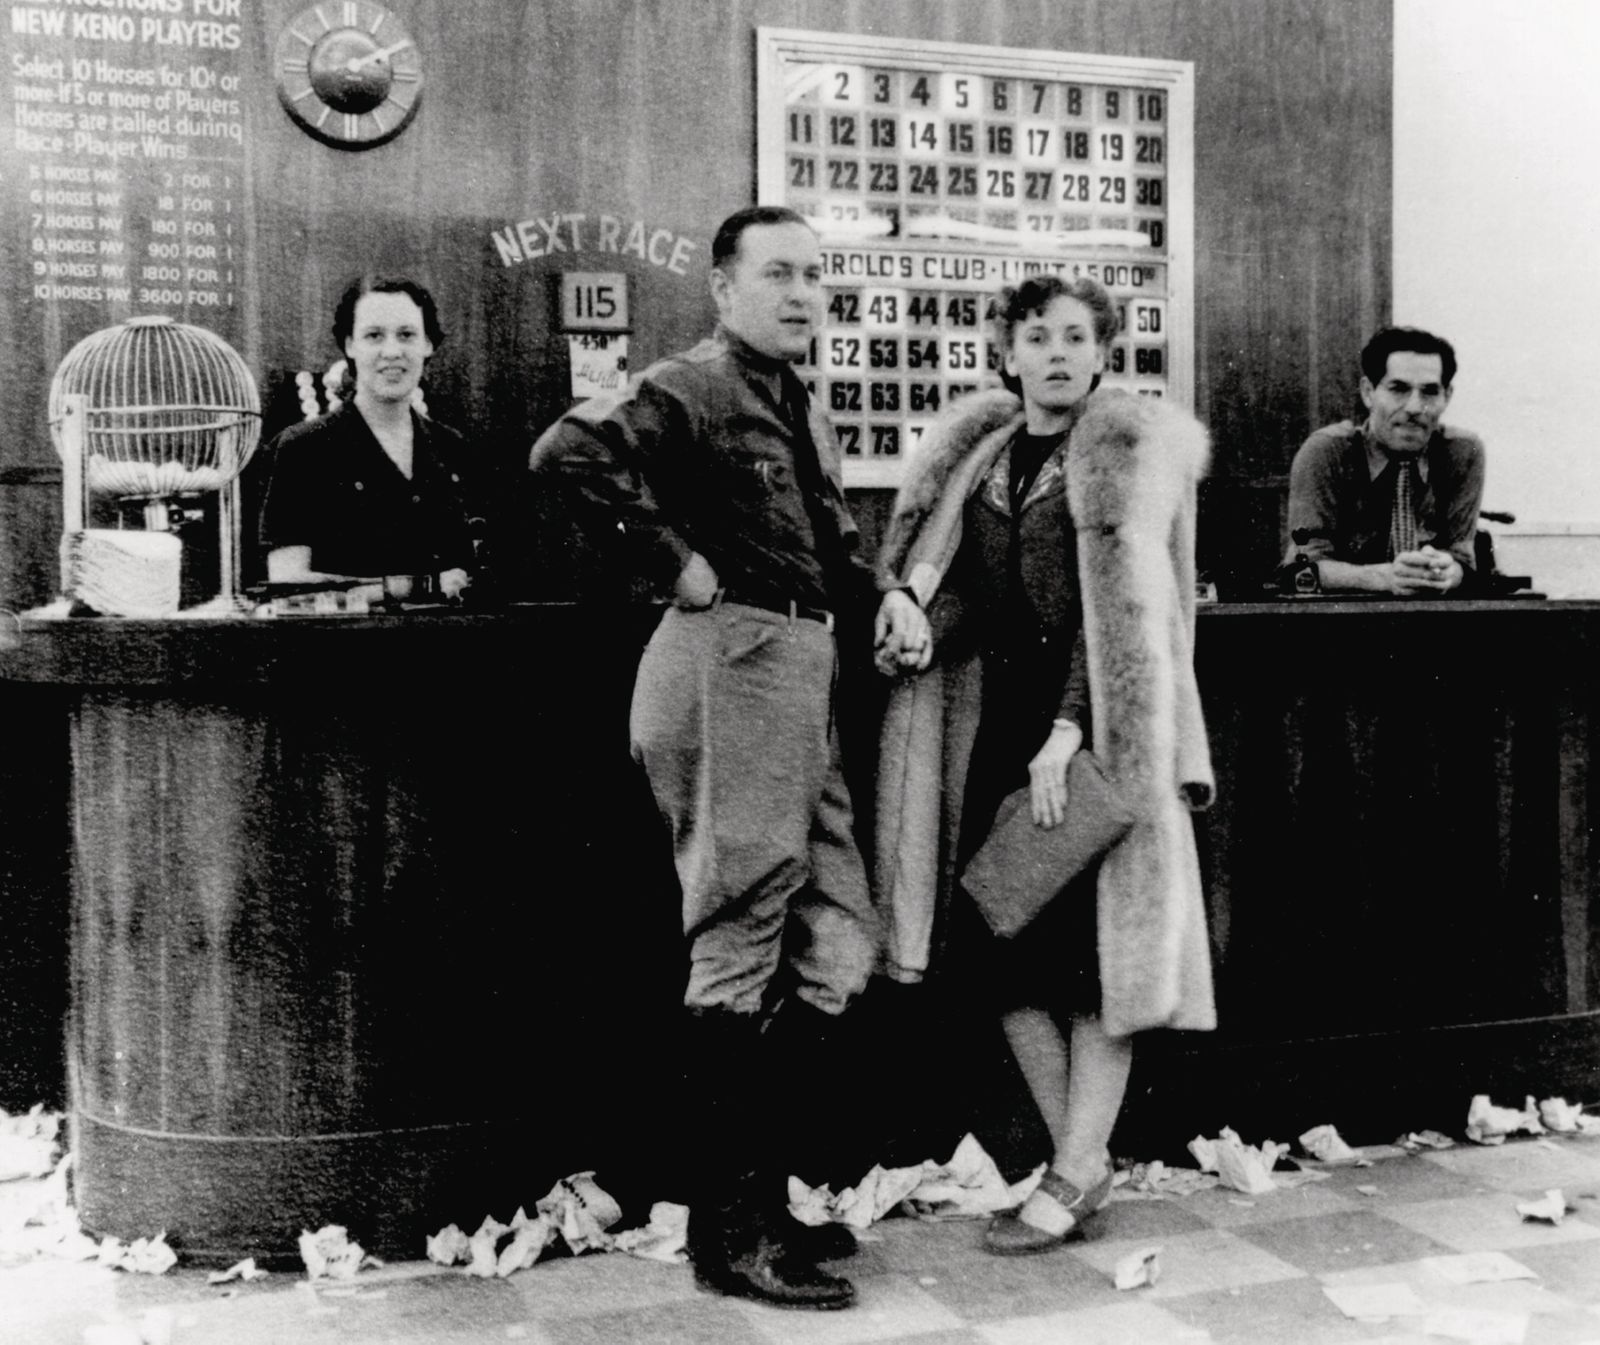 A black-and-white photo of a counter in front of which stand a richly-dressed man and woman. Behind the counter are two staff. On the counter is a 'squirrel cage' containing balls. On the wall behind the counter are the rules, a clock, and a board which lights up numbers when they are called.